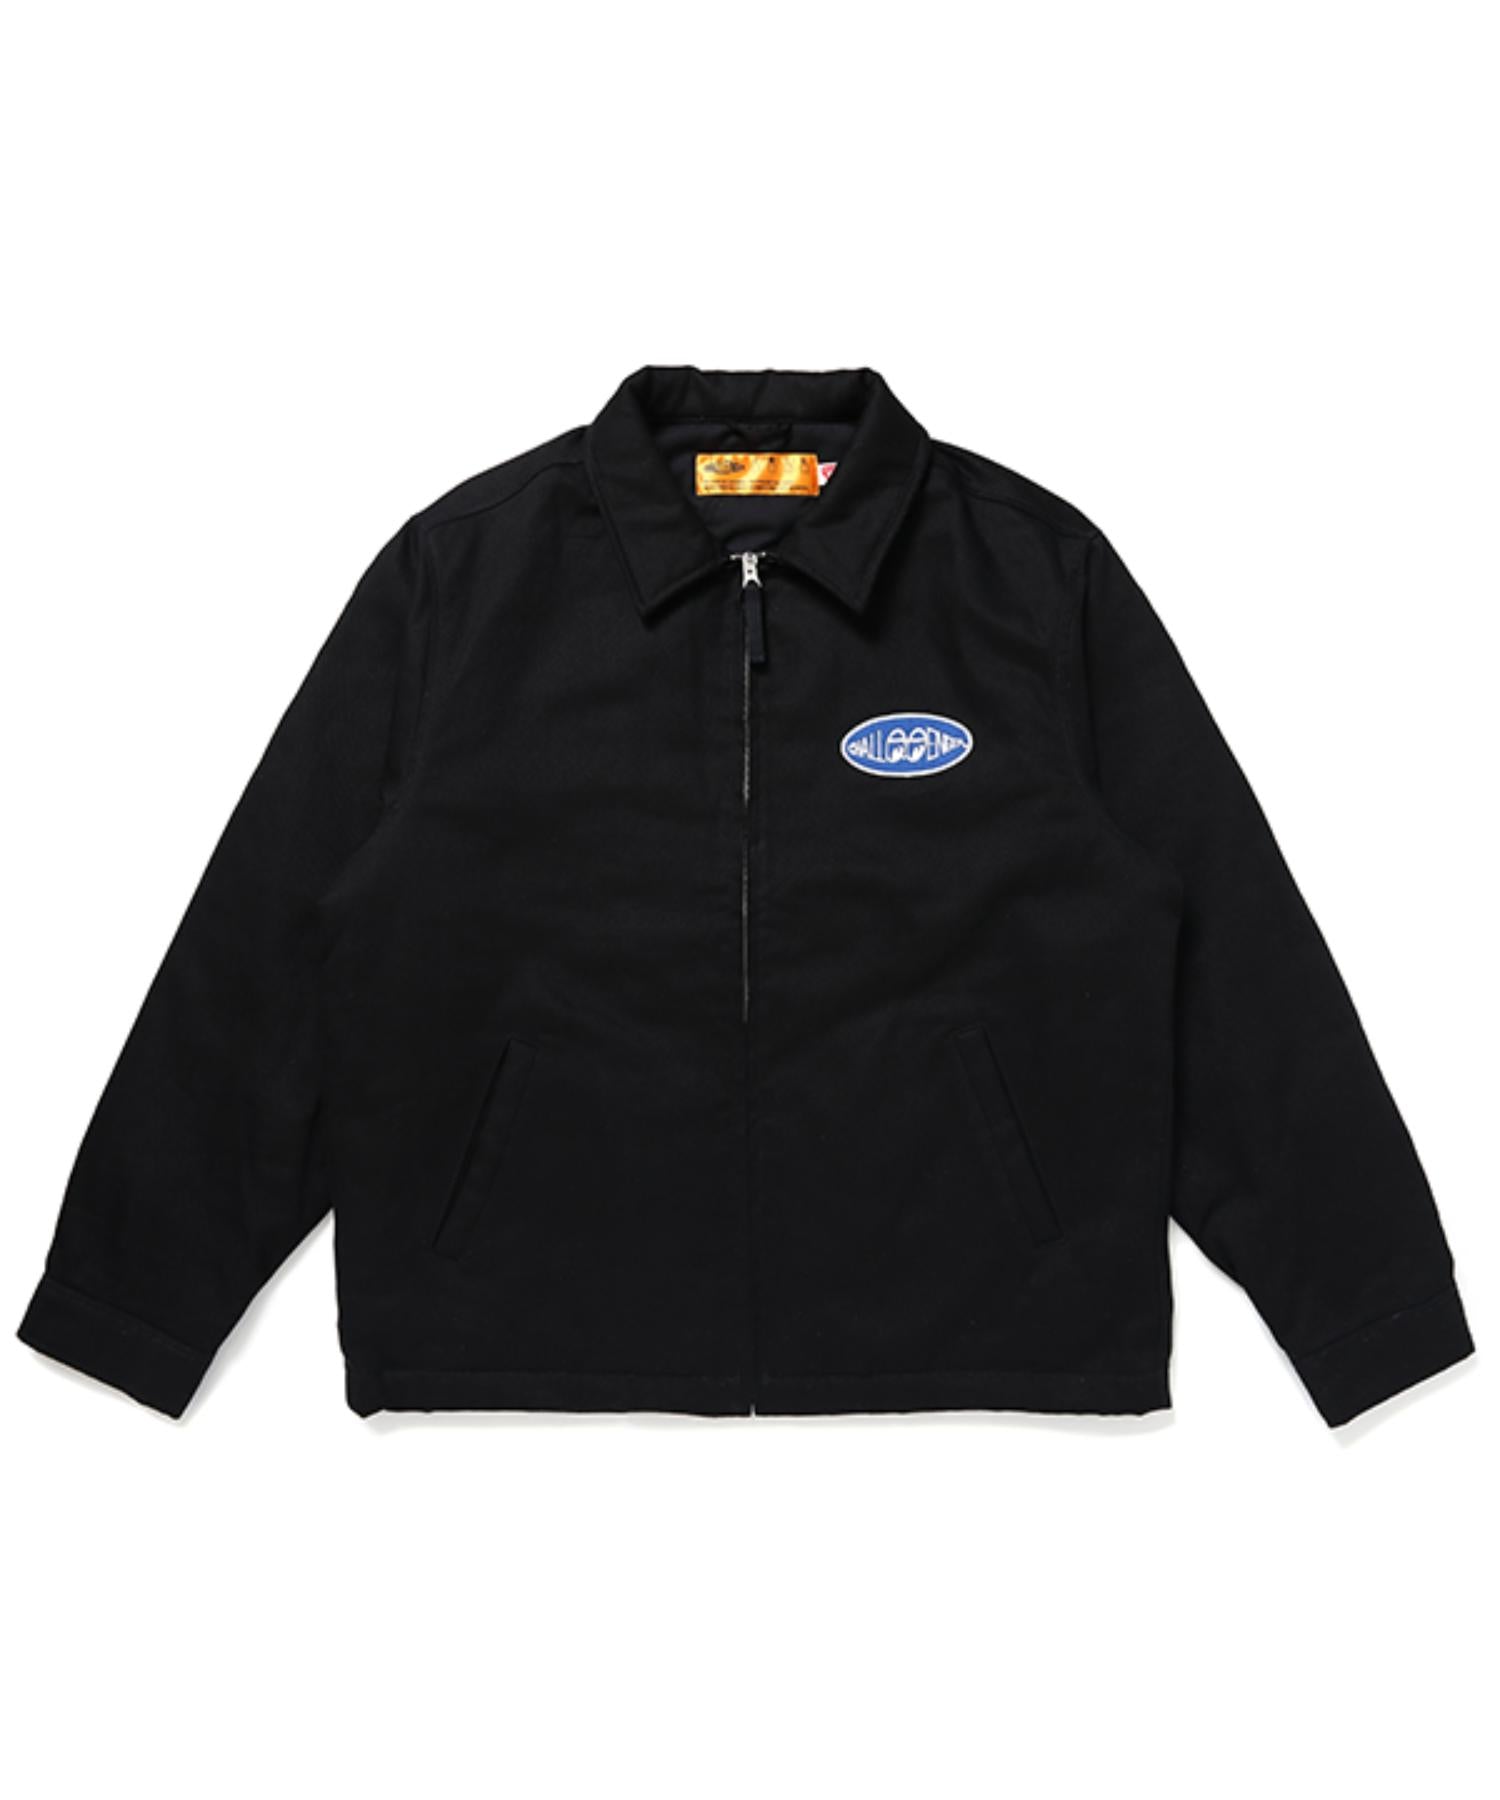 CHALLENGER MOON EQUIPPED WORK JACKET L最安値で出品致します